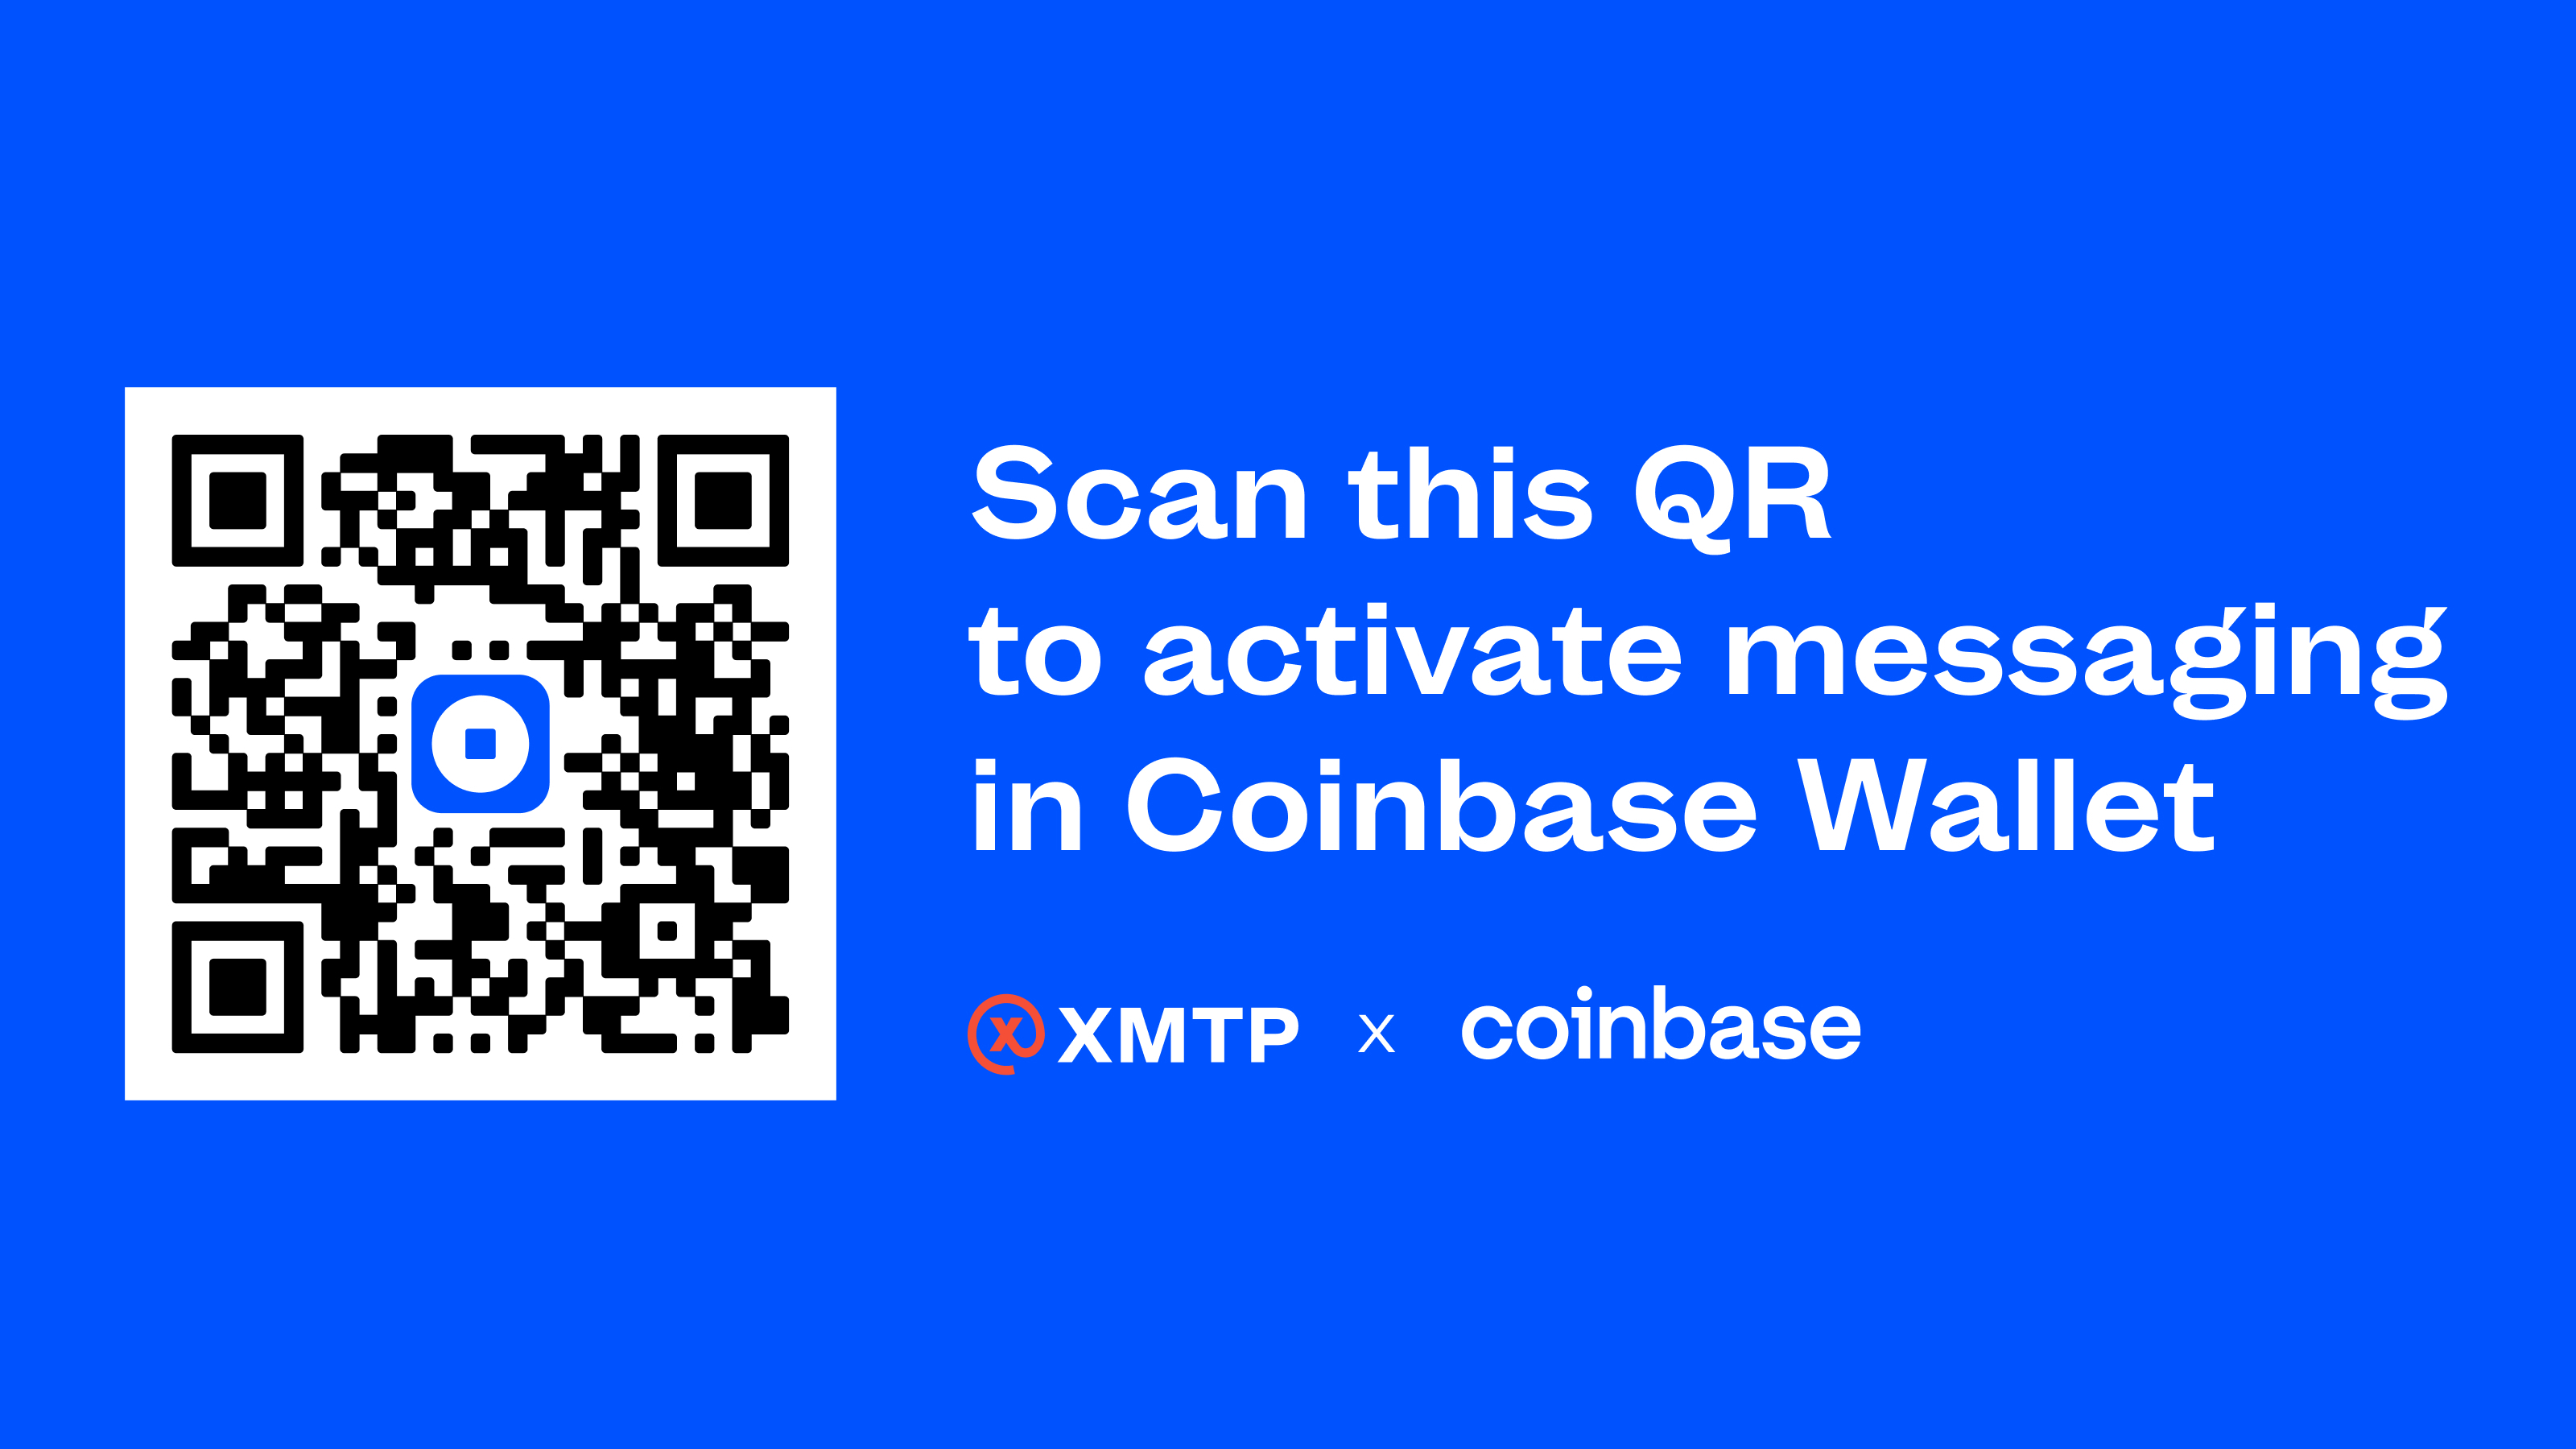 Reach users through Coinbase Wallet and XMTP